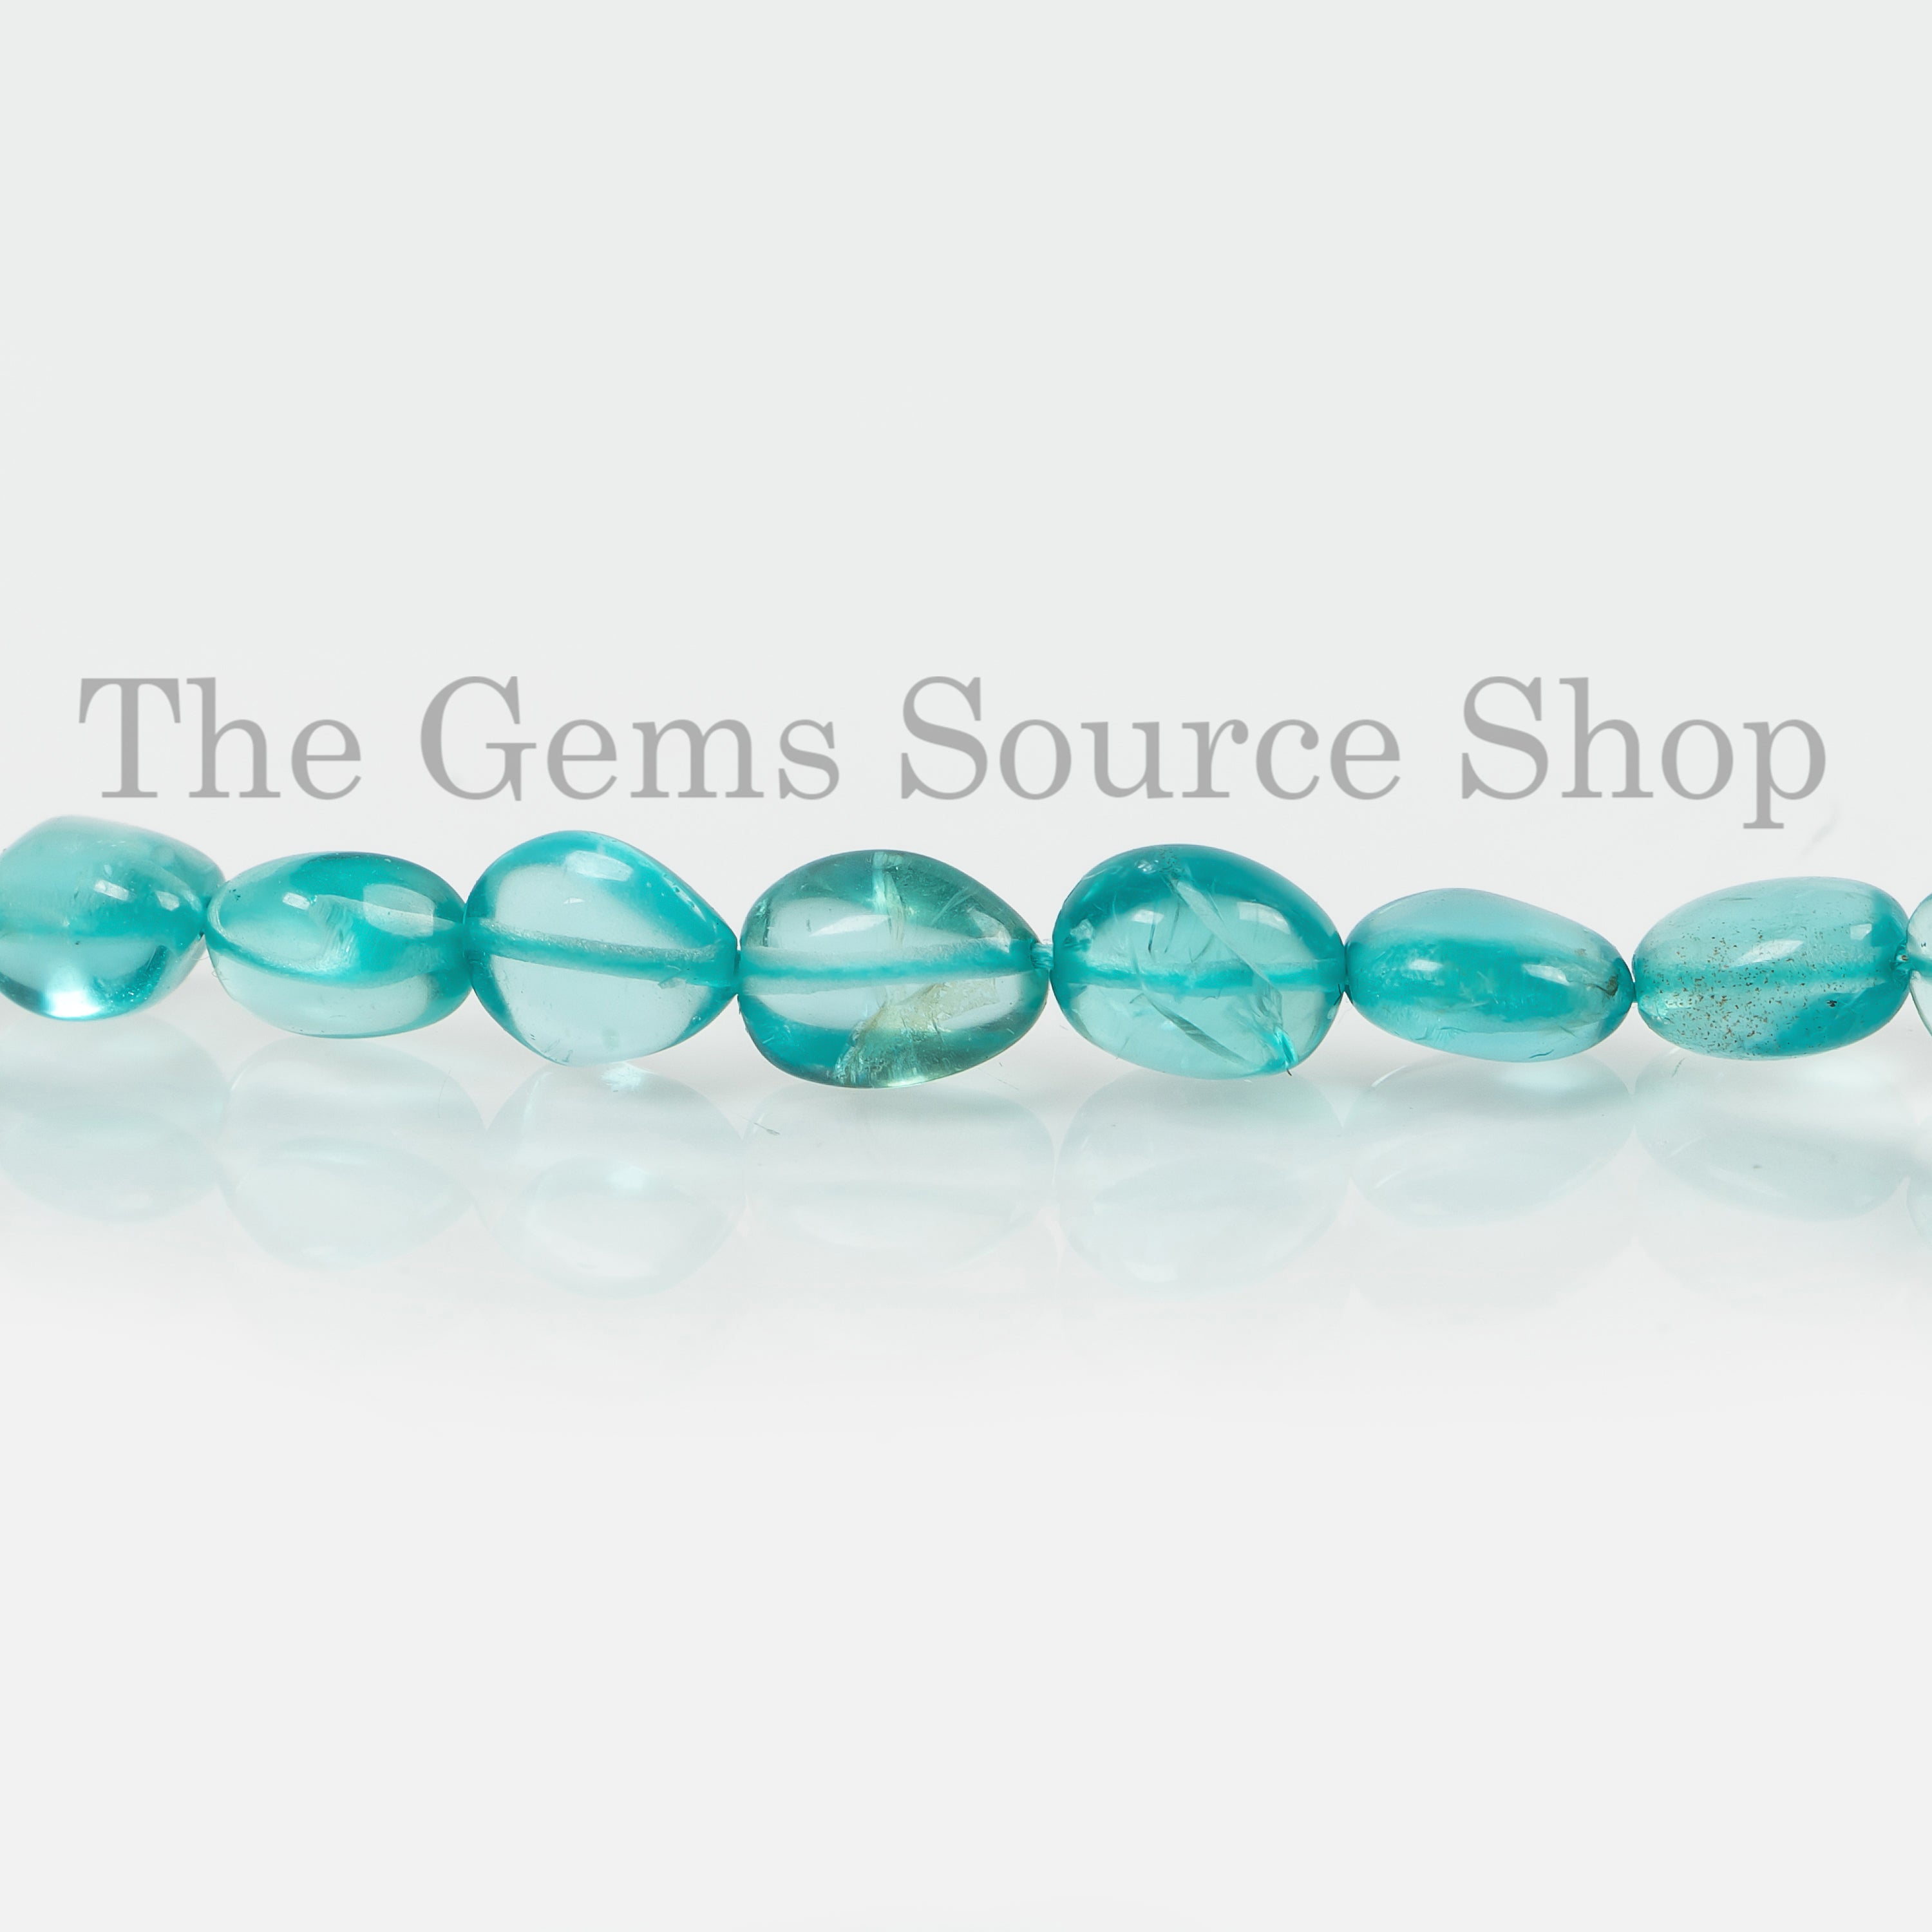 Top Quality Paraiba Color Apatite Beads, Apatite Smooth Nugget Beads, Apatite Gemstone For Jewelry Making